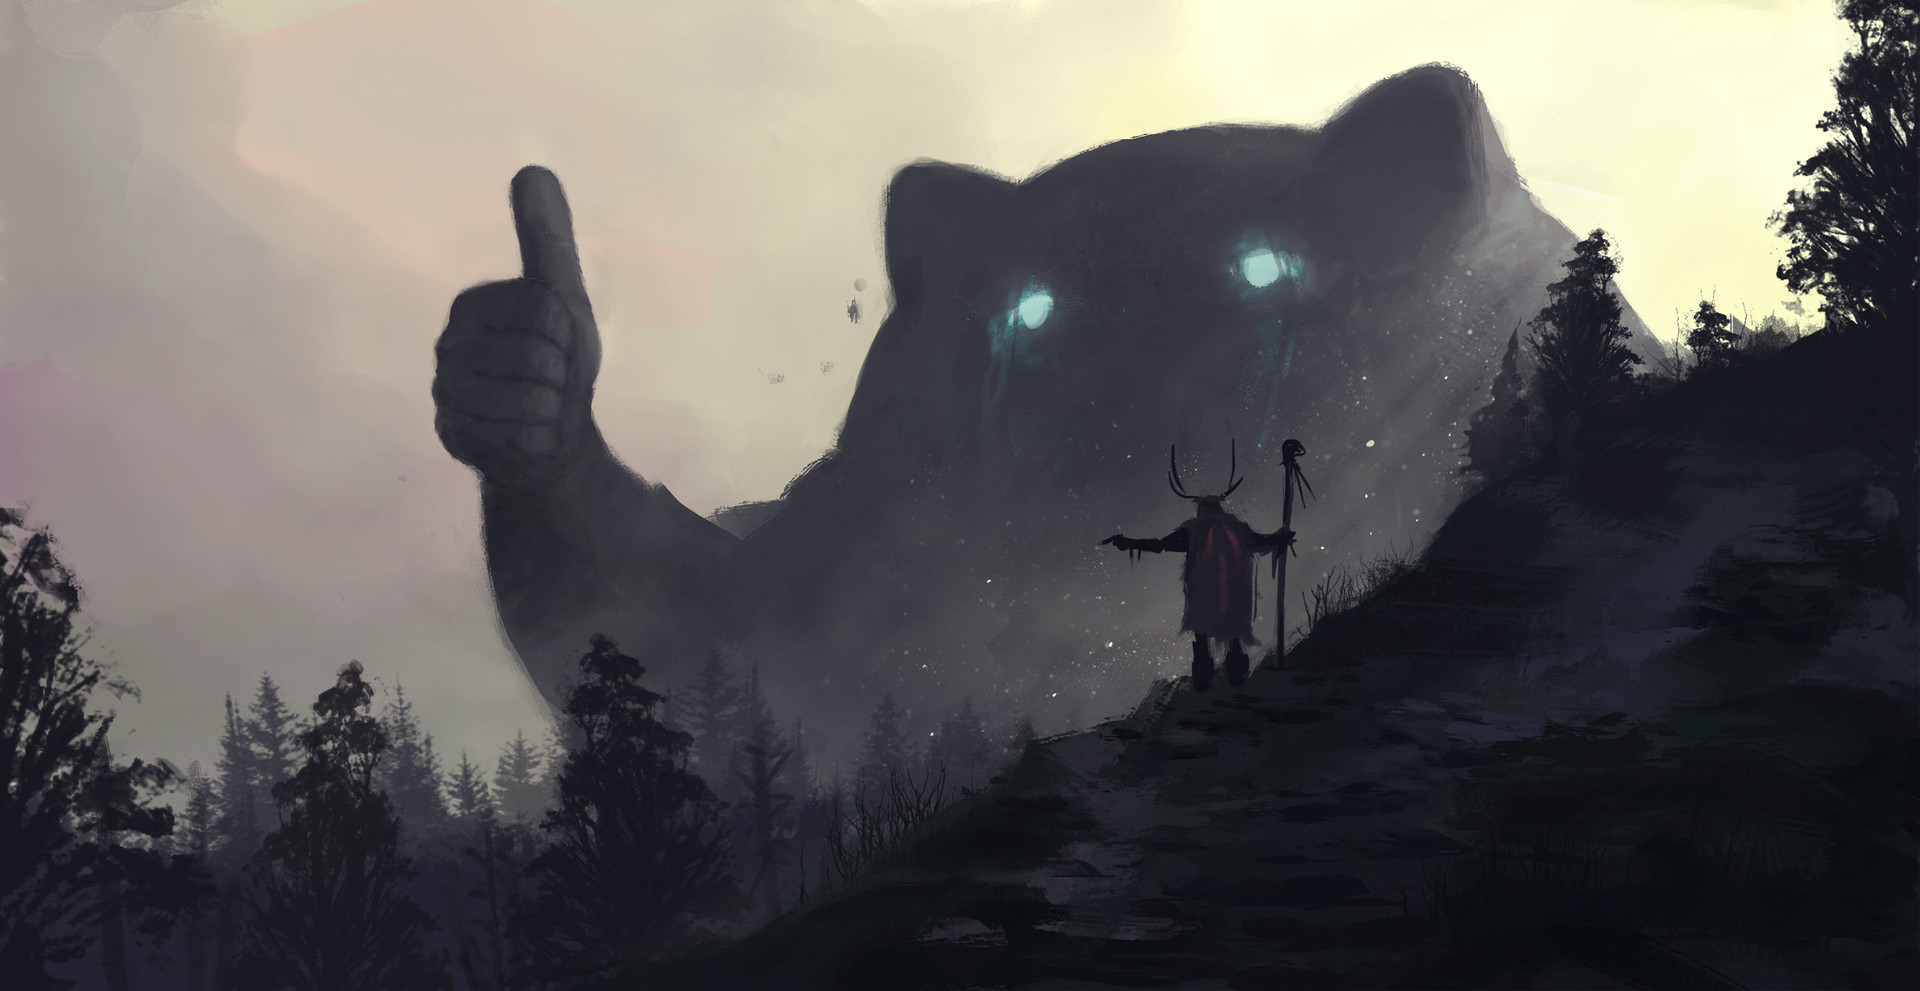 General 1920x991 fantasy art druids spirits forest mountains thumbs up mist giant beige blue eyes humor drawing